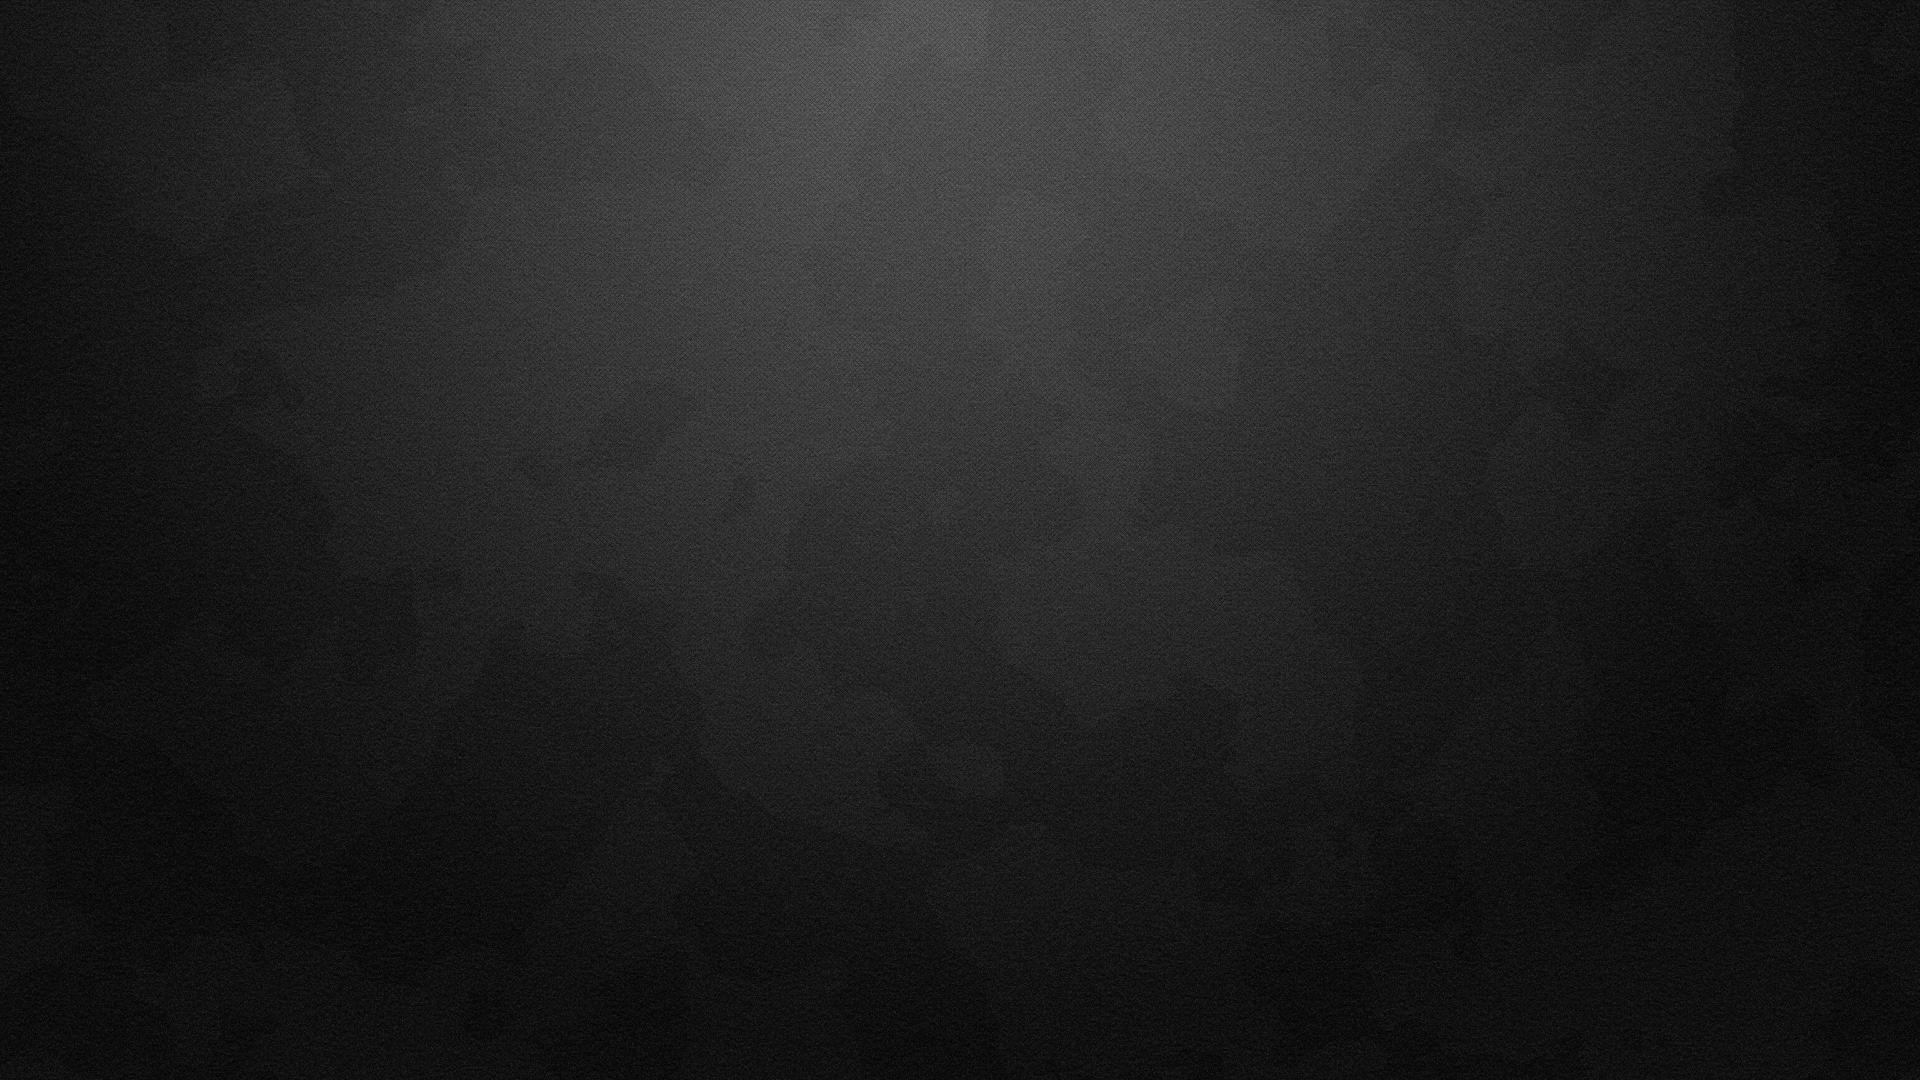 Faded Wallpaper 69 Images